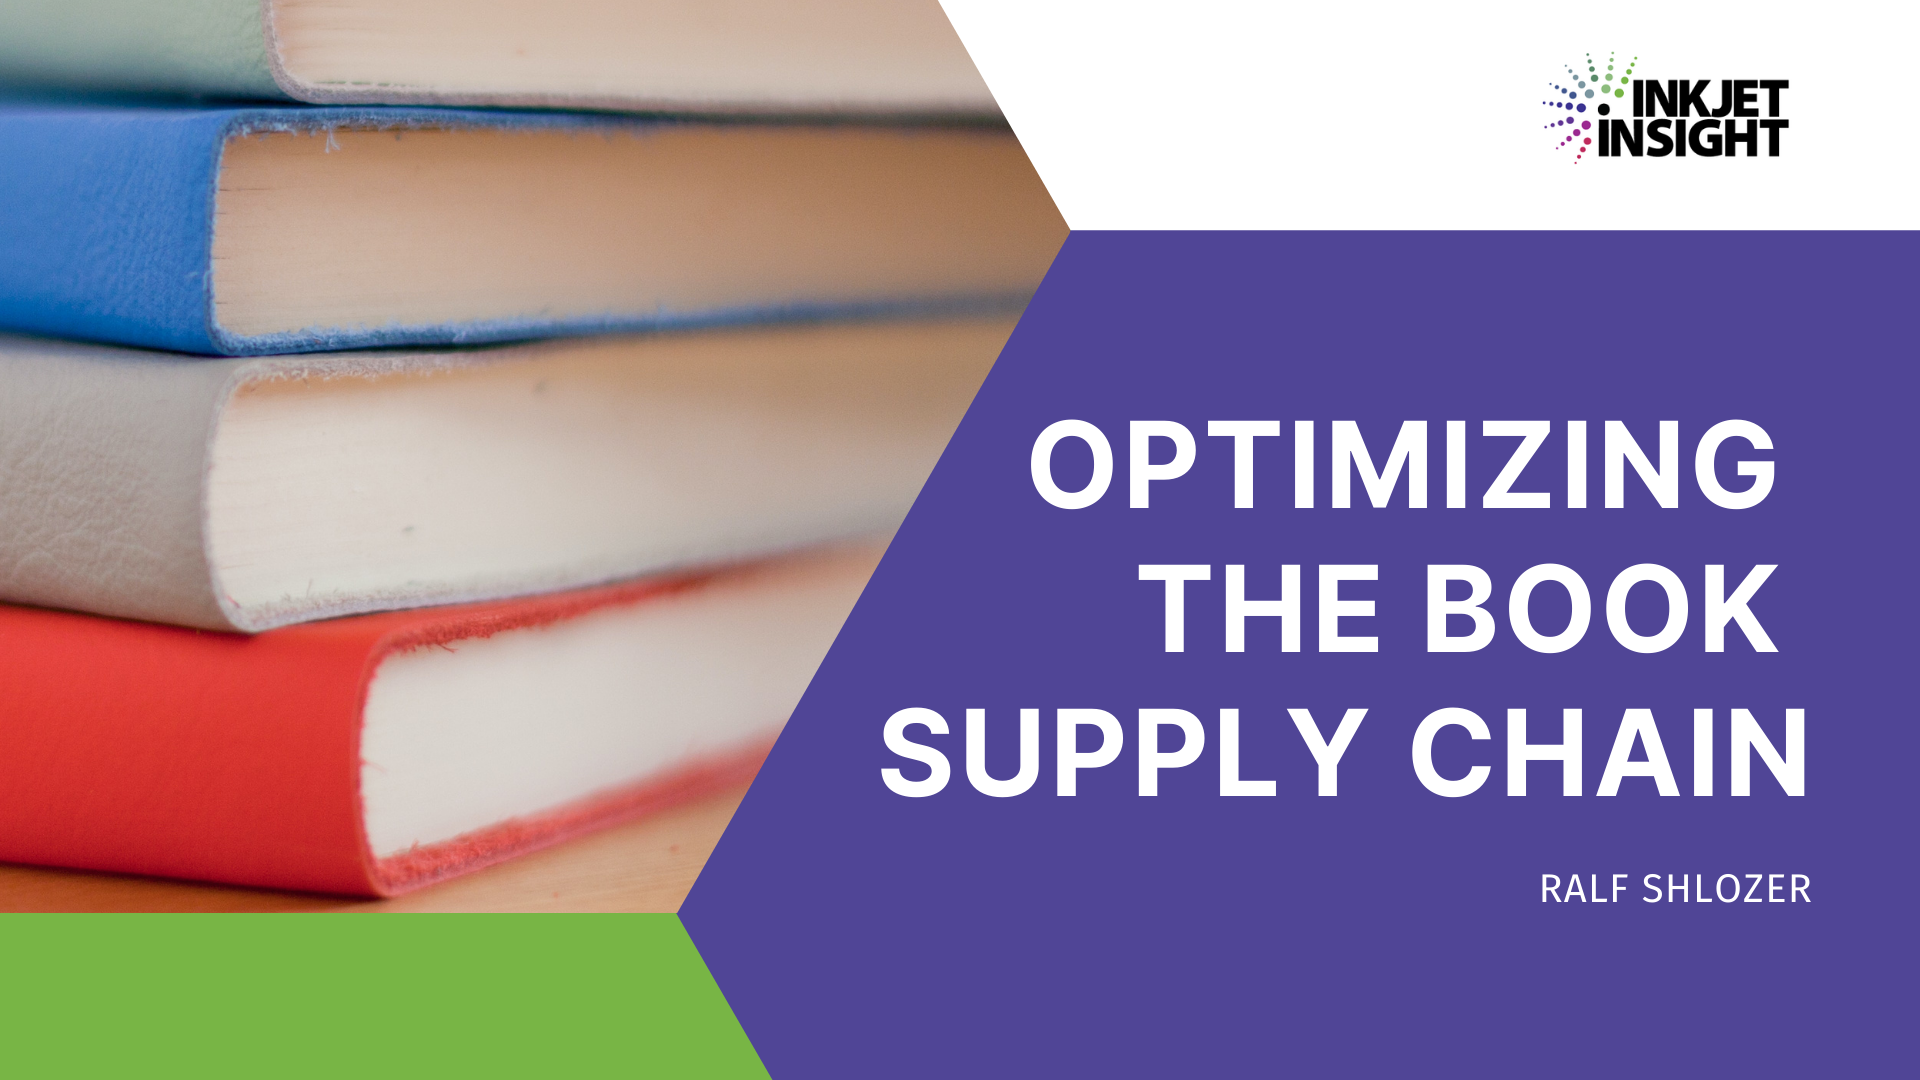 Featured image for “Optimizing the Book Supply Chain”